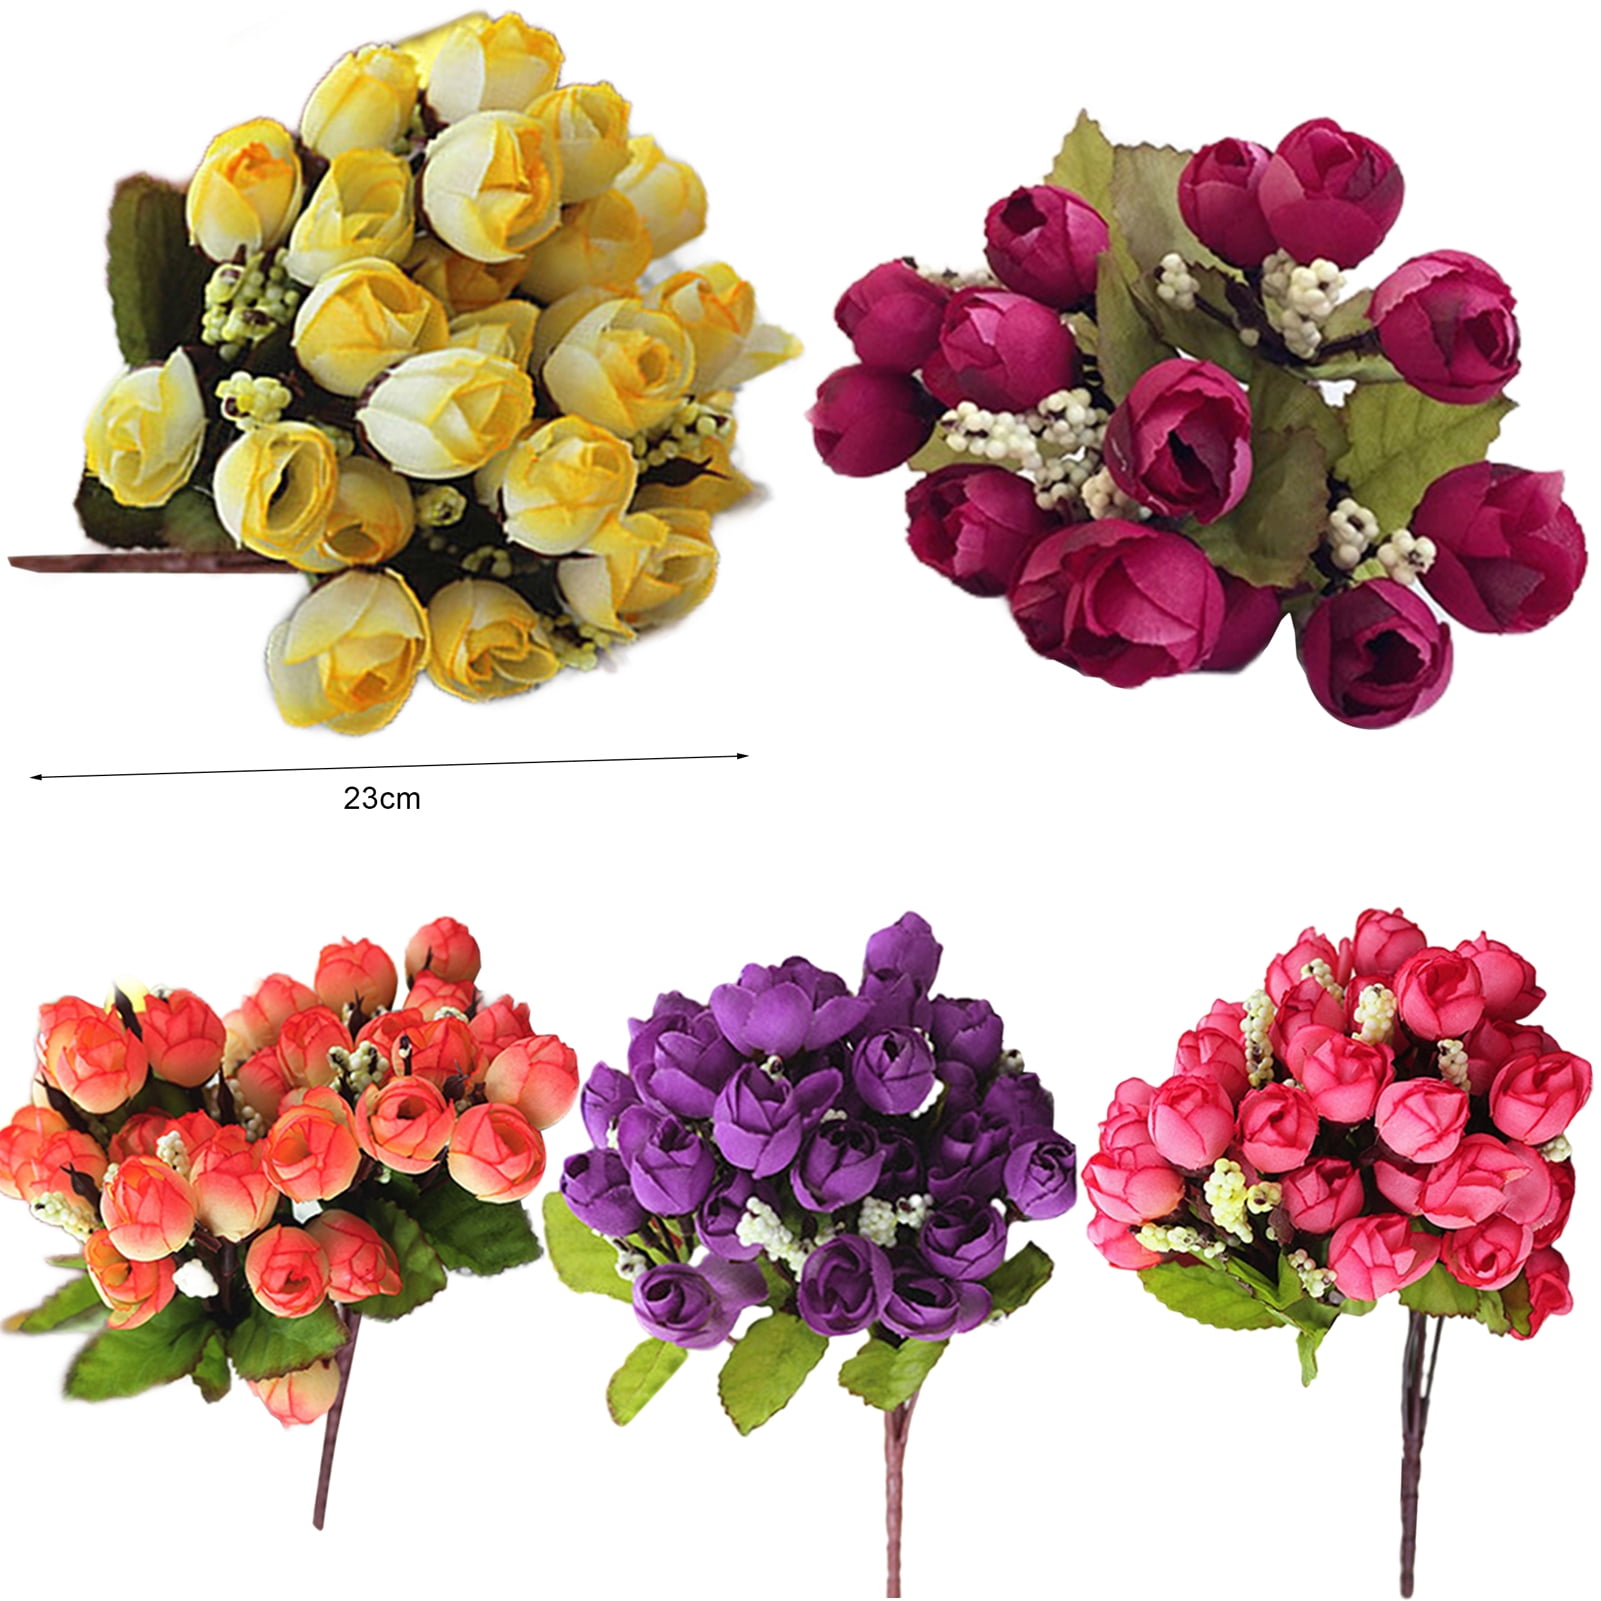 New! 12 pc Spring Mini Roses Flowers Shapes Craft Floral Decor Embellishment